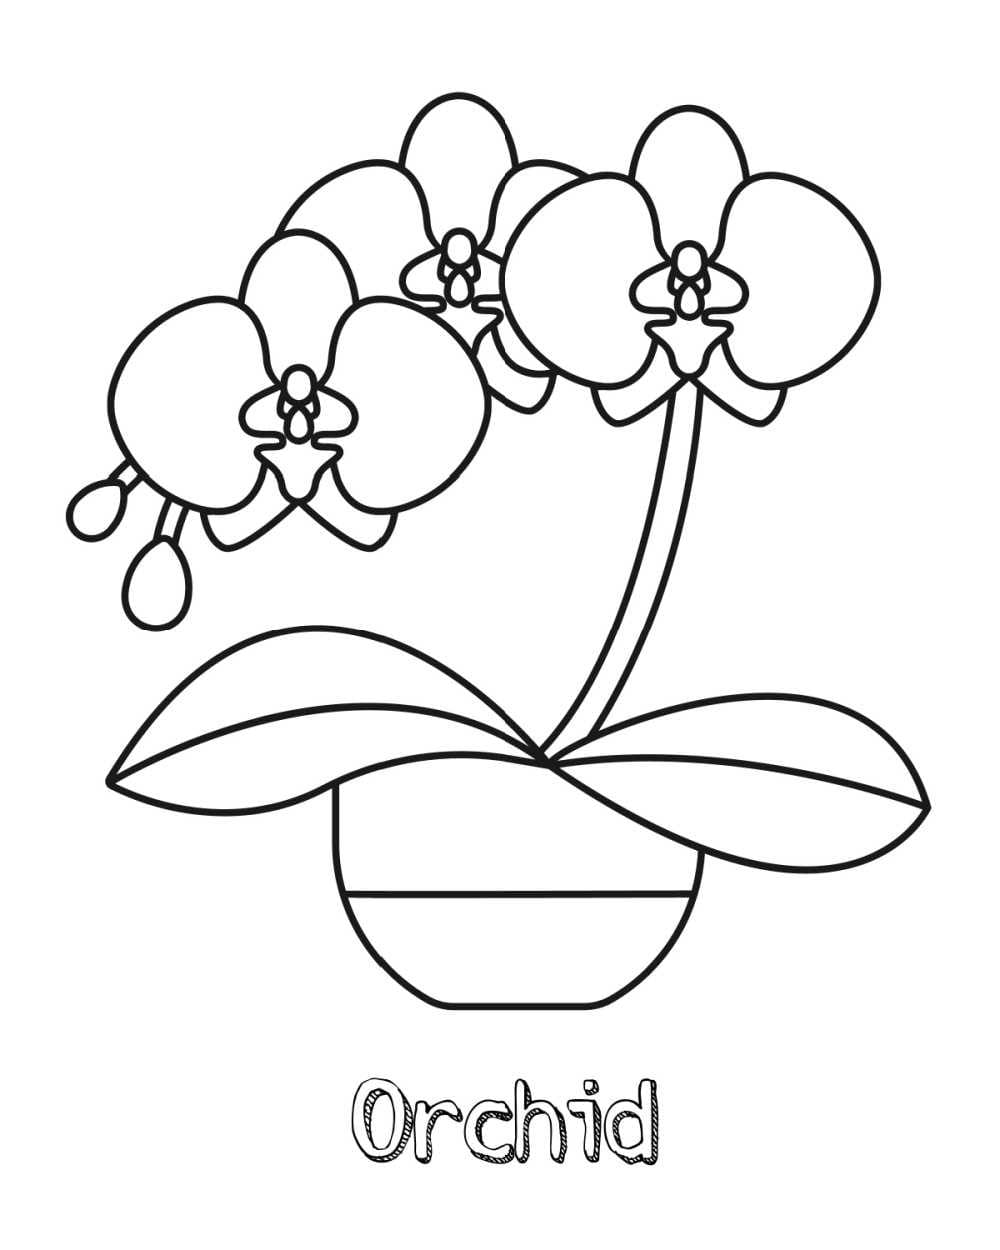 orchid-coloring-pages-free-printable-coloring-pages-for-kids